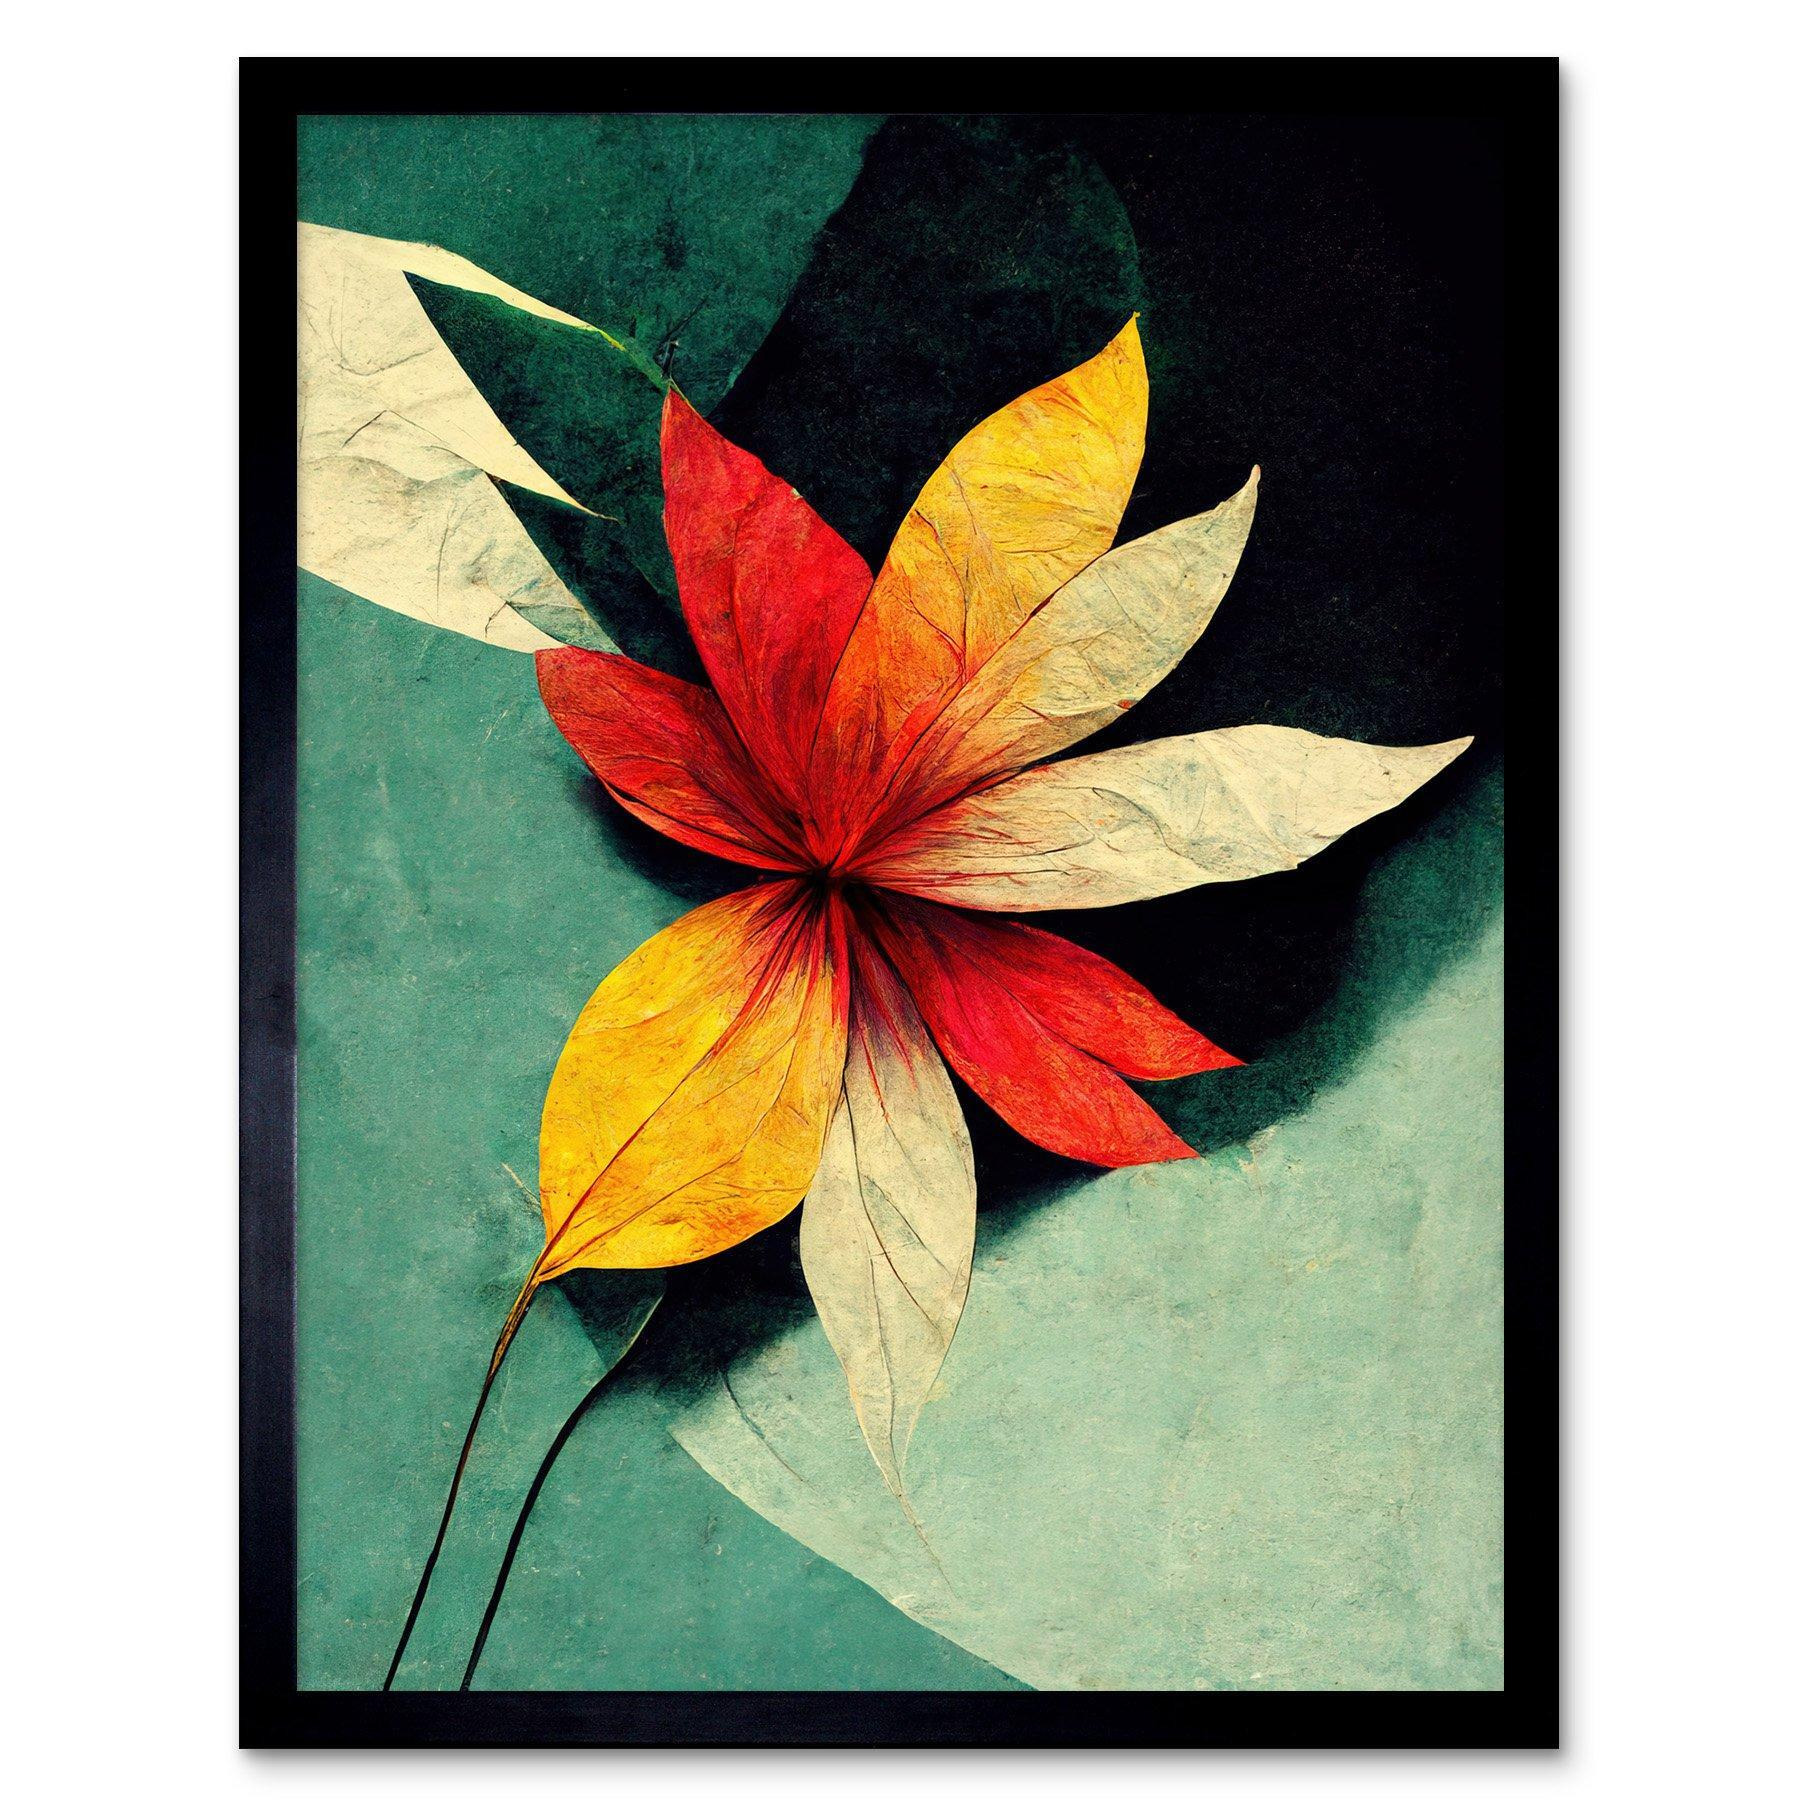 Abstract Flowers Teal Red Yellow Art Print Framed Poster Wall Decor 12x16 inch - image 1